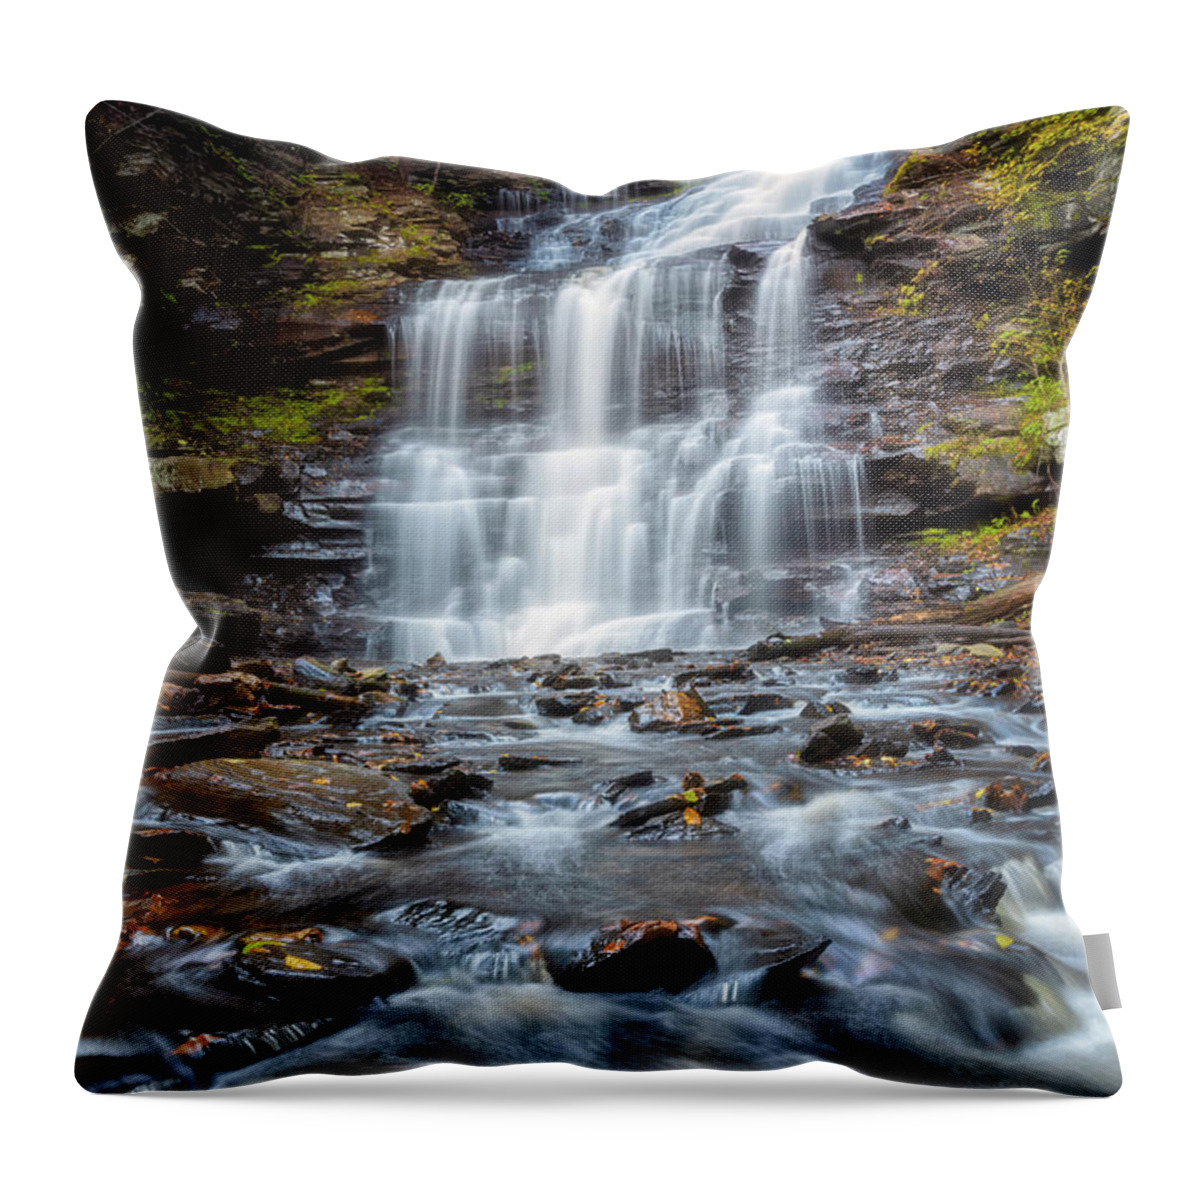 Silky Flow Throw Pillow featuring the photograph Silky Flow by Russell Pugh